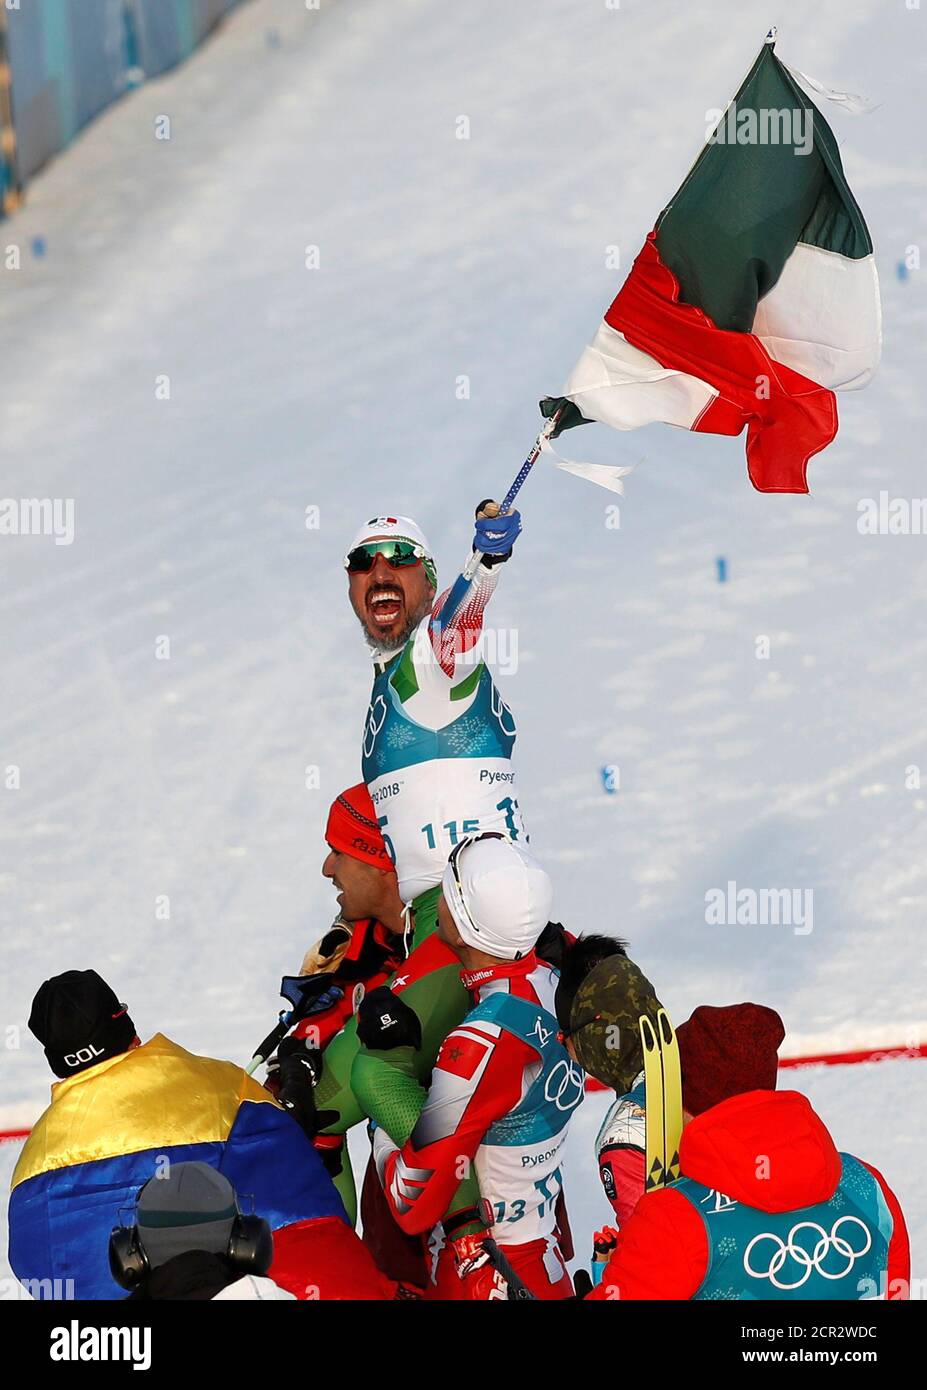 Cross-Country Skiing – Pyeongchang 2018 Winter Olympics – Men's 15km Free – Alpensia Cross-Country Skiing Centre – Pyeongchang, South Korea – February 16, 2018 - German Madrazo of Mexico holds the Mexican flag after crossing the finish line. REUTERS/Murad Sezer     TPX IMAGES OF THE DAY Stock Photo